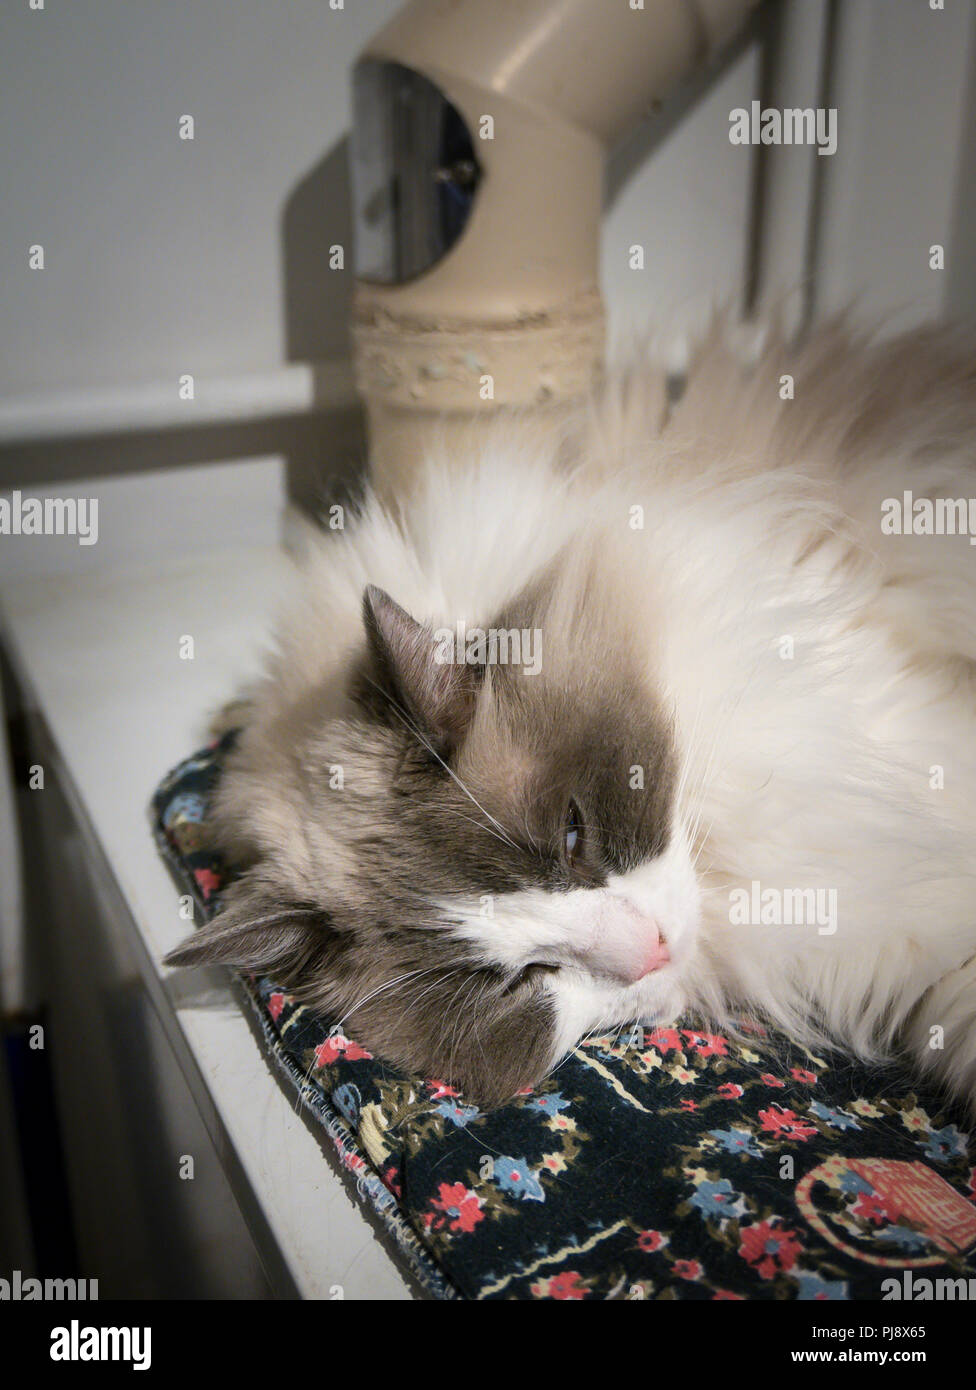 A Ragdoll cat has found a winter warm spot on top of a working hot water boiler in UK Stock Photo